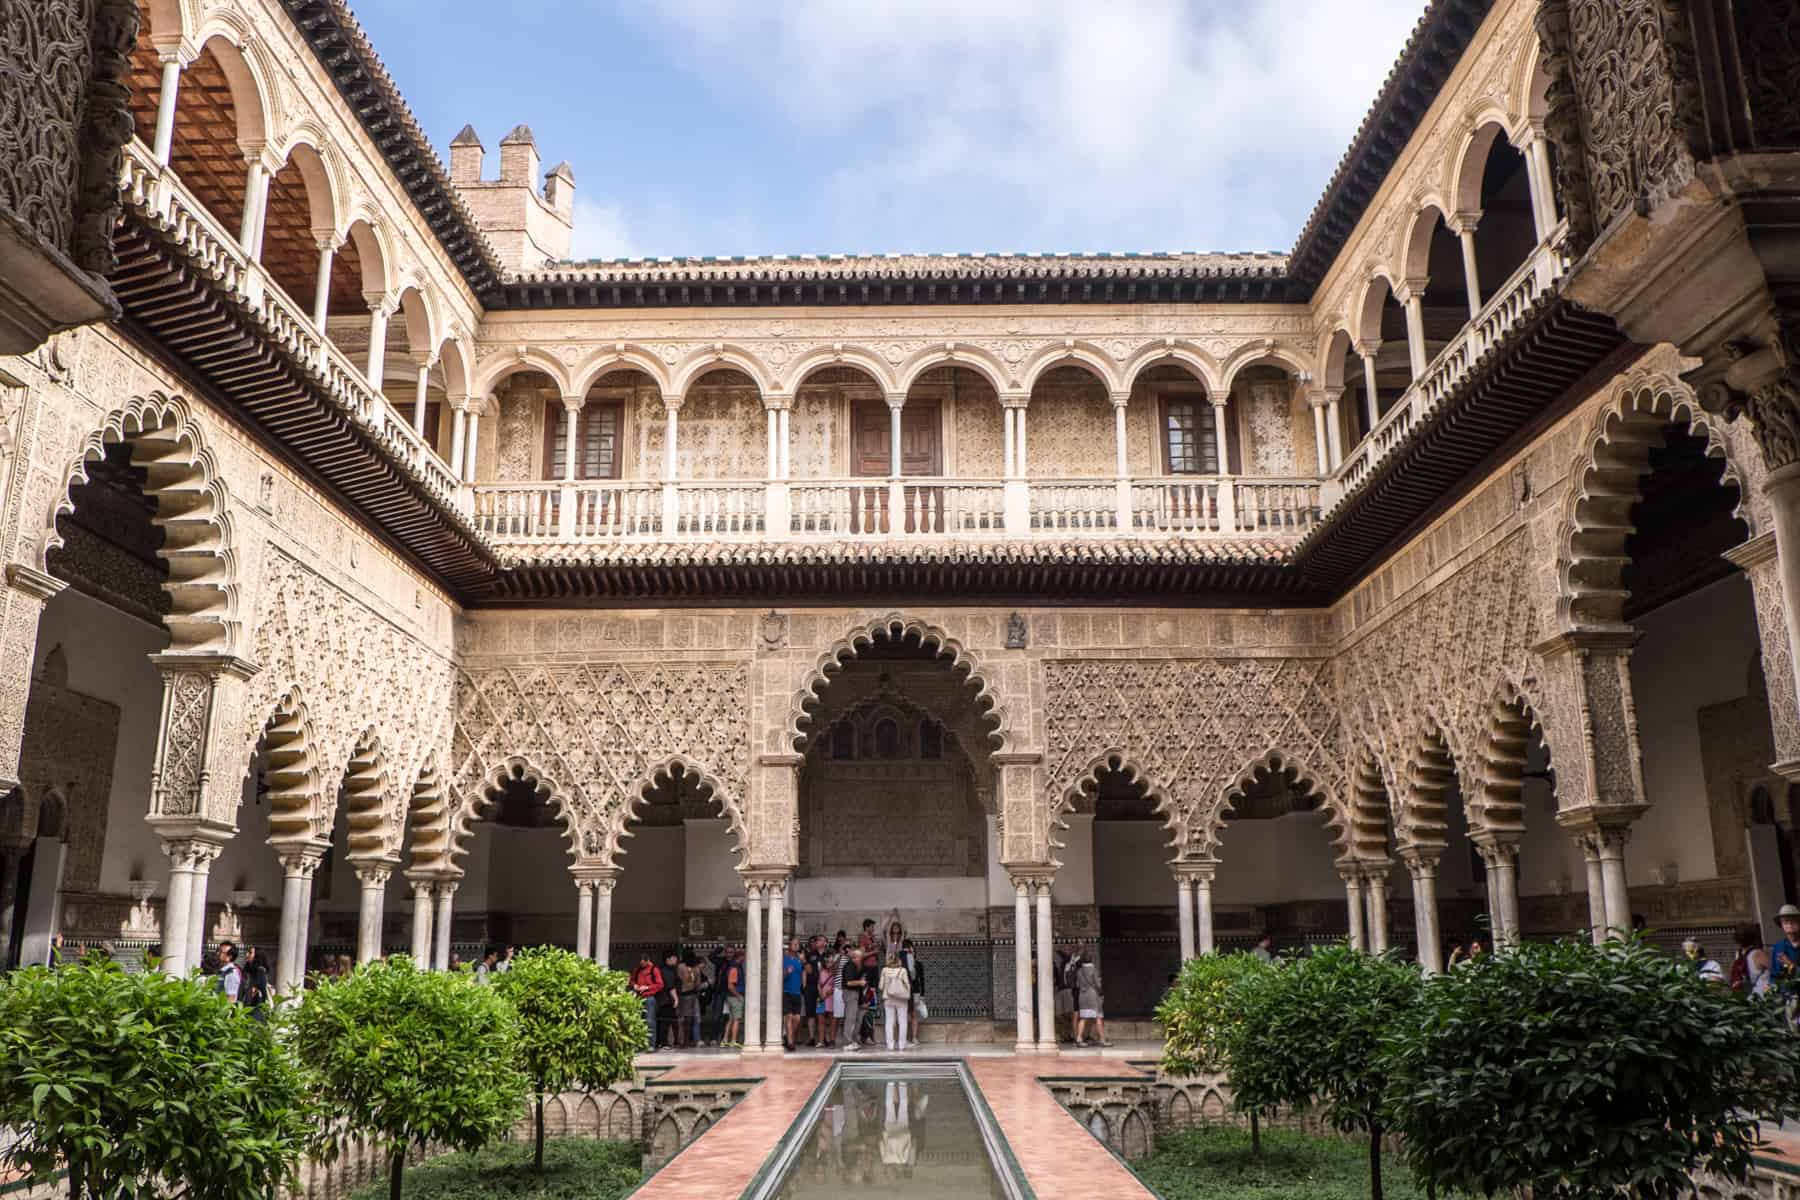 The two tiered intricately carved and curved archways and balconies in the Mudéjar architectural palace of the Real Alcázar of Seville. In this open courtyard a pool of water cut through its middle, and people can be found standing in the corridors of the lower floor.. 